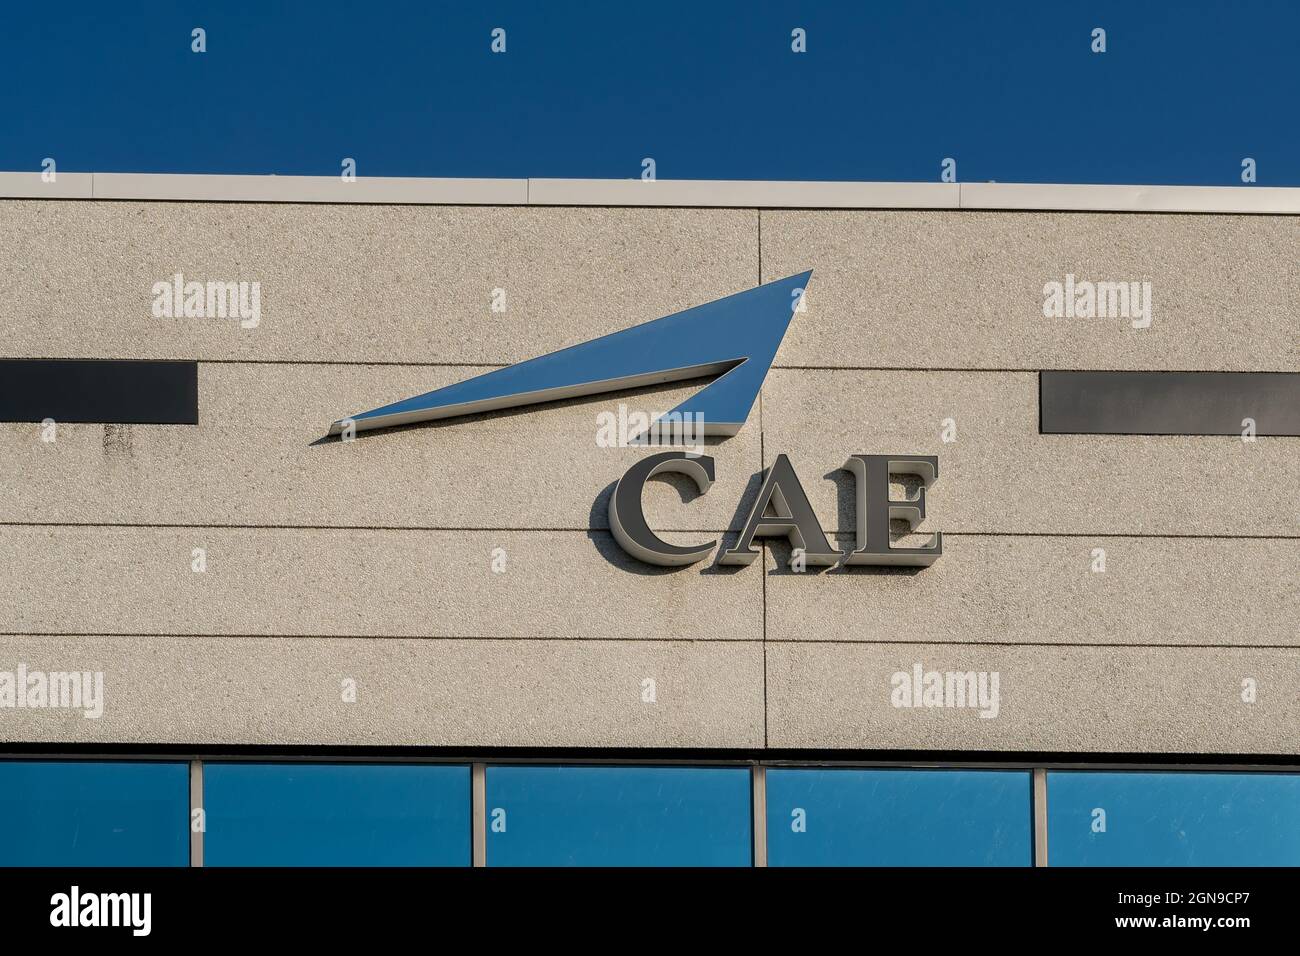 Montreal, QC, Canada - September 4, 2021: Close up of CAE sign at their headquarters in Montreal, QC, Canada. Stock Photo